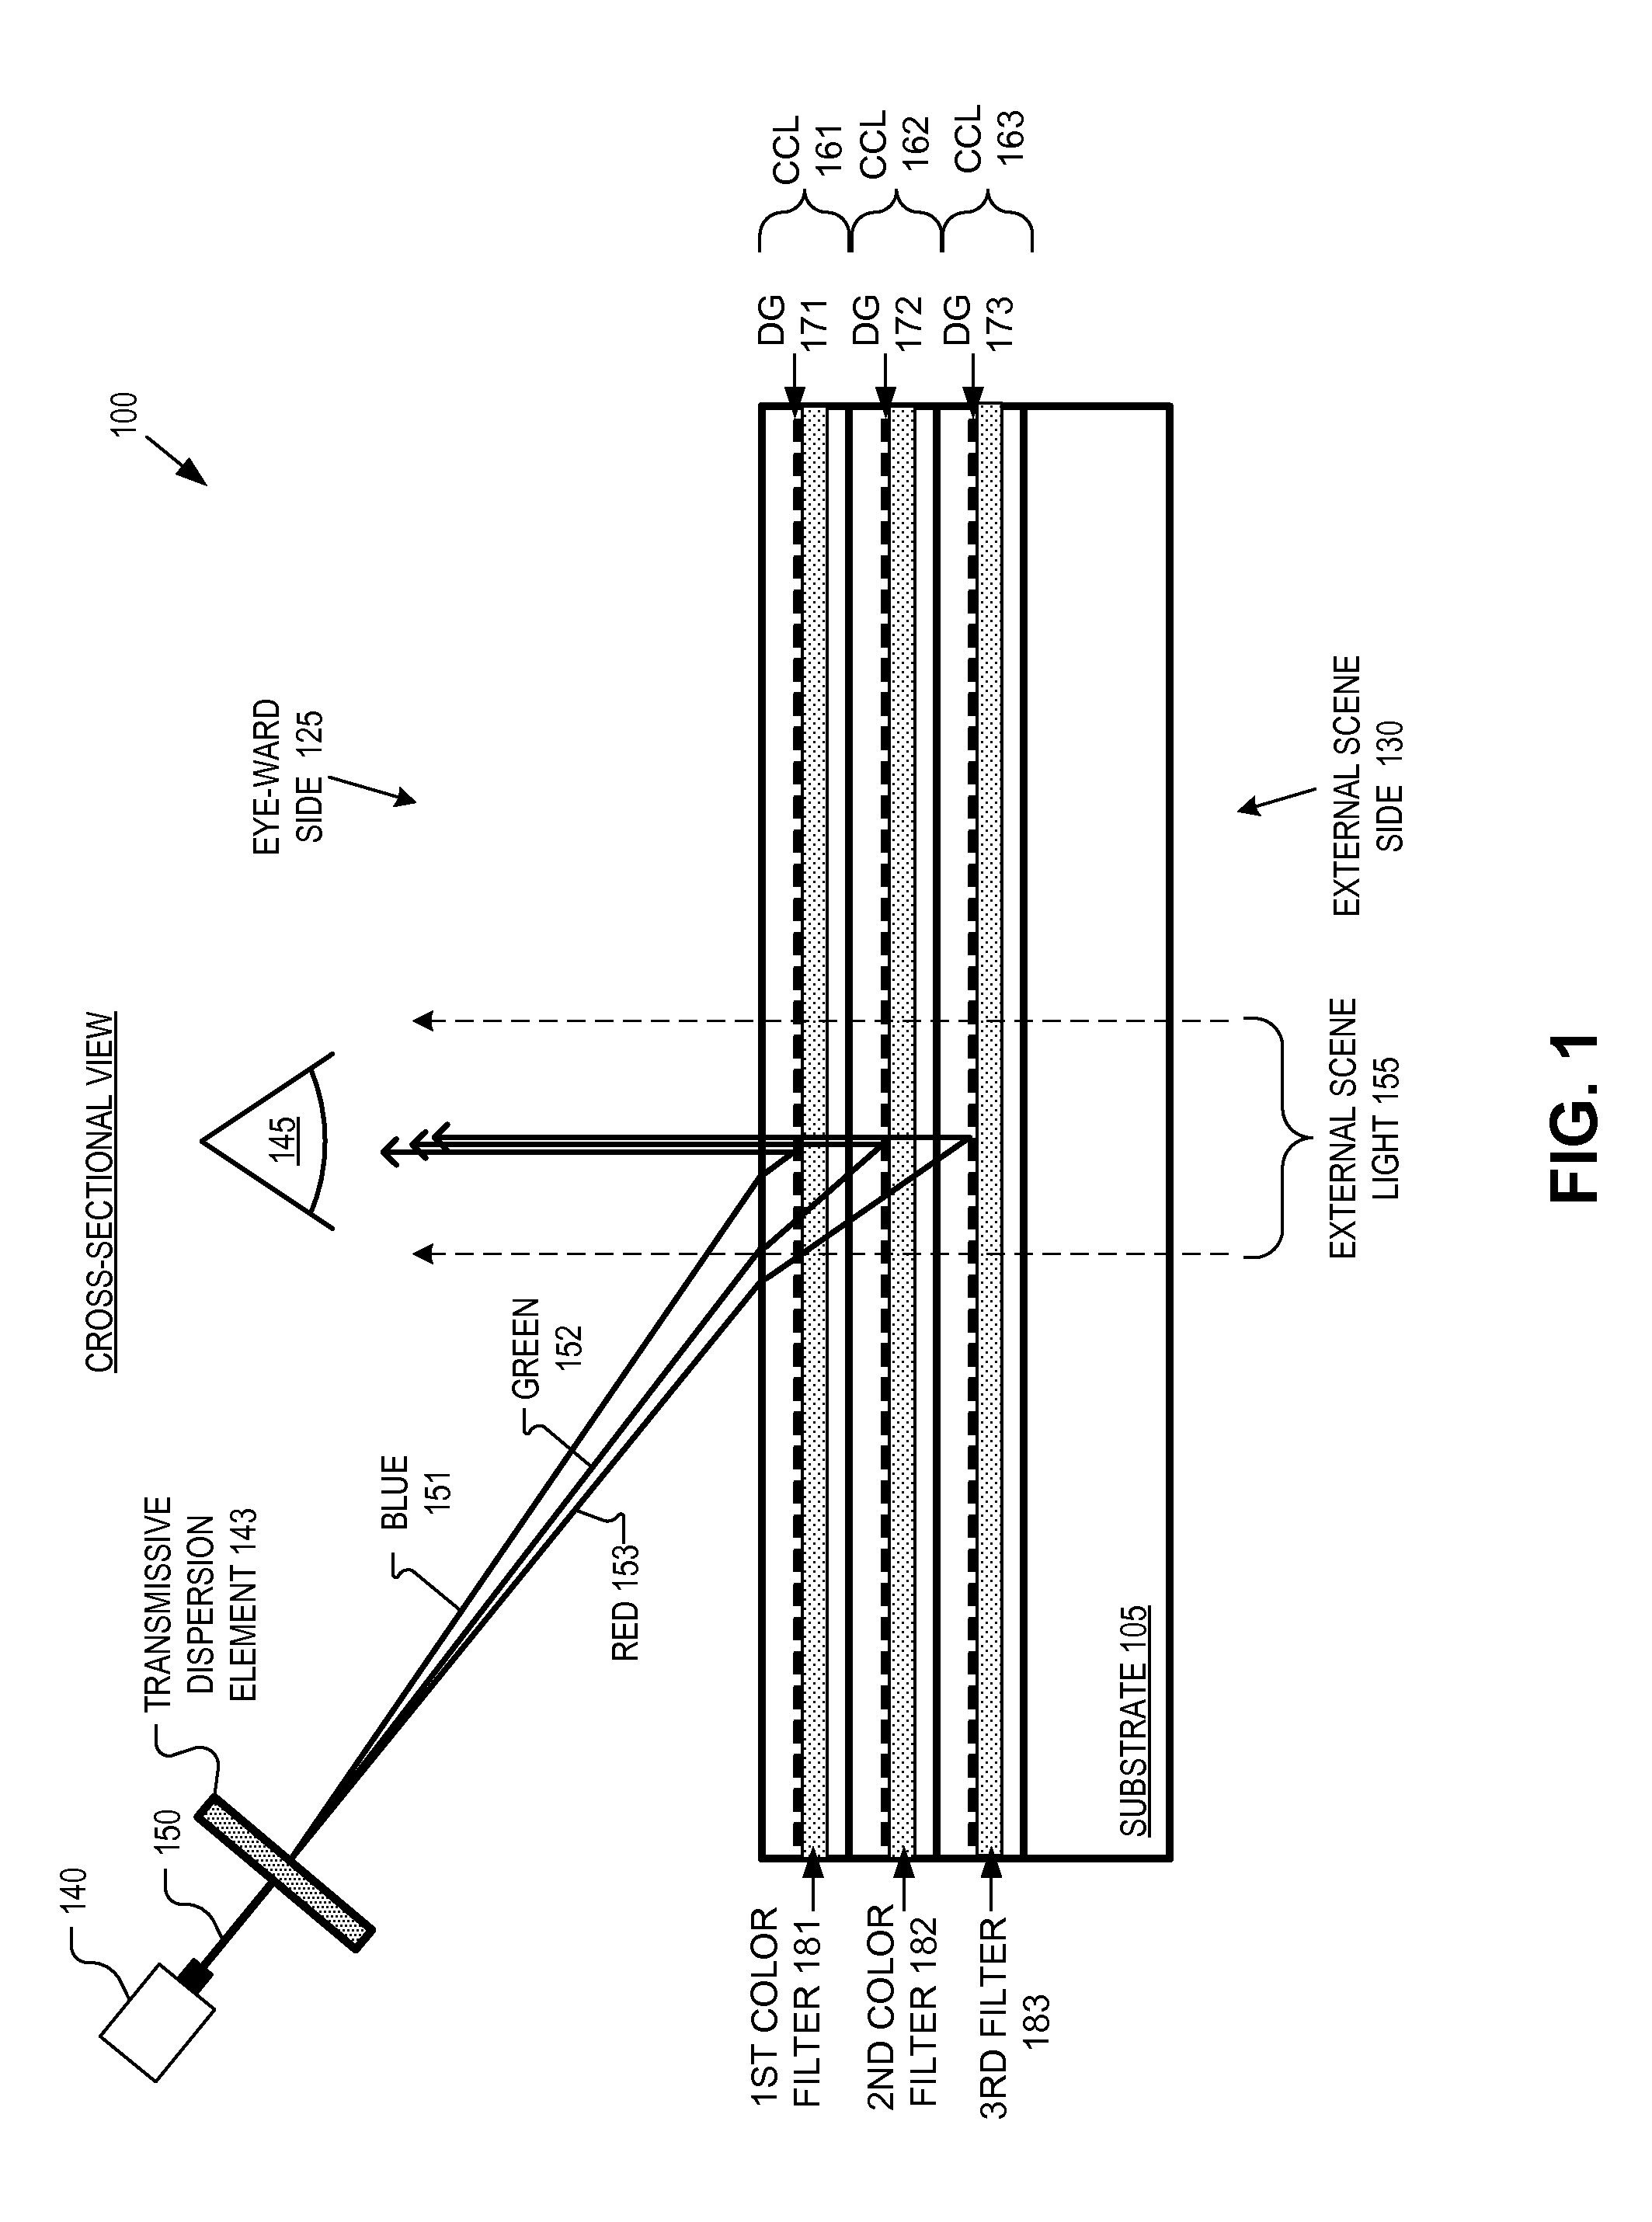 Optical combiner for near-eye display